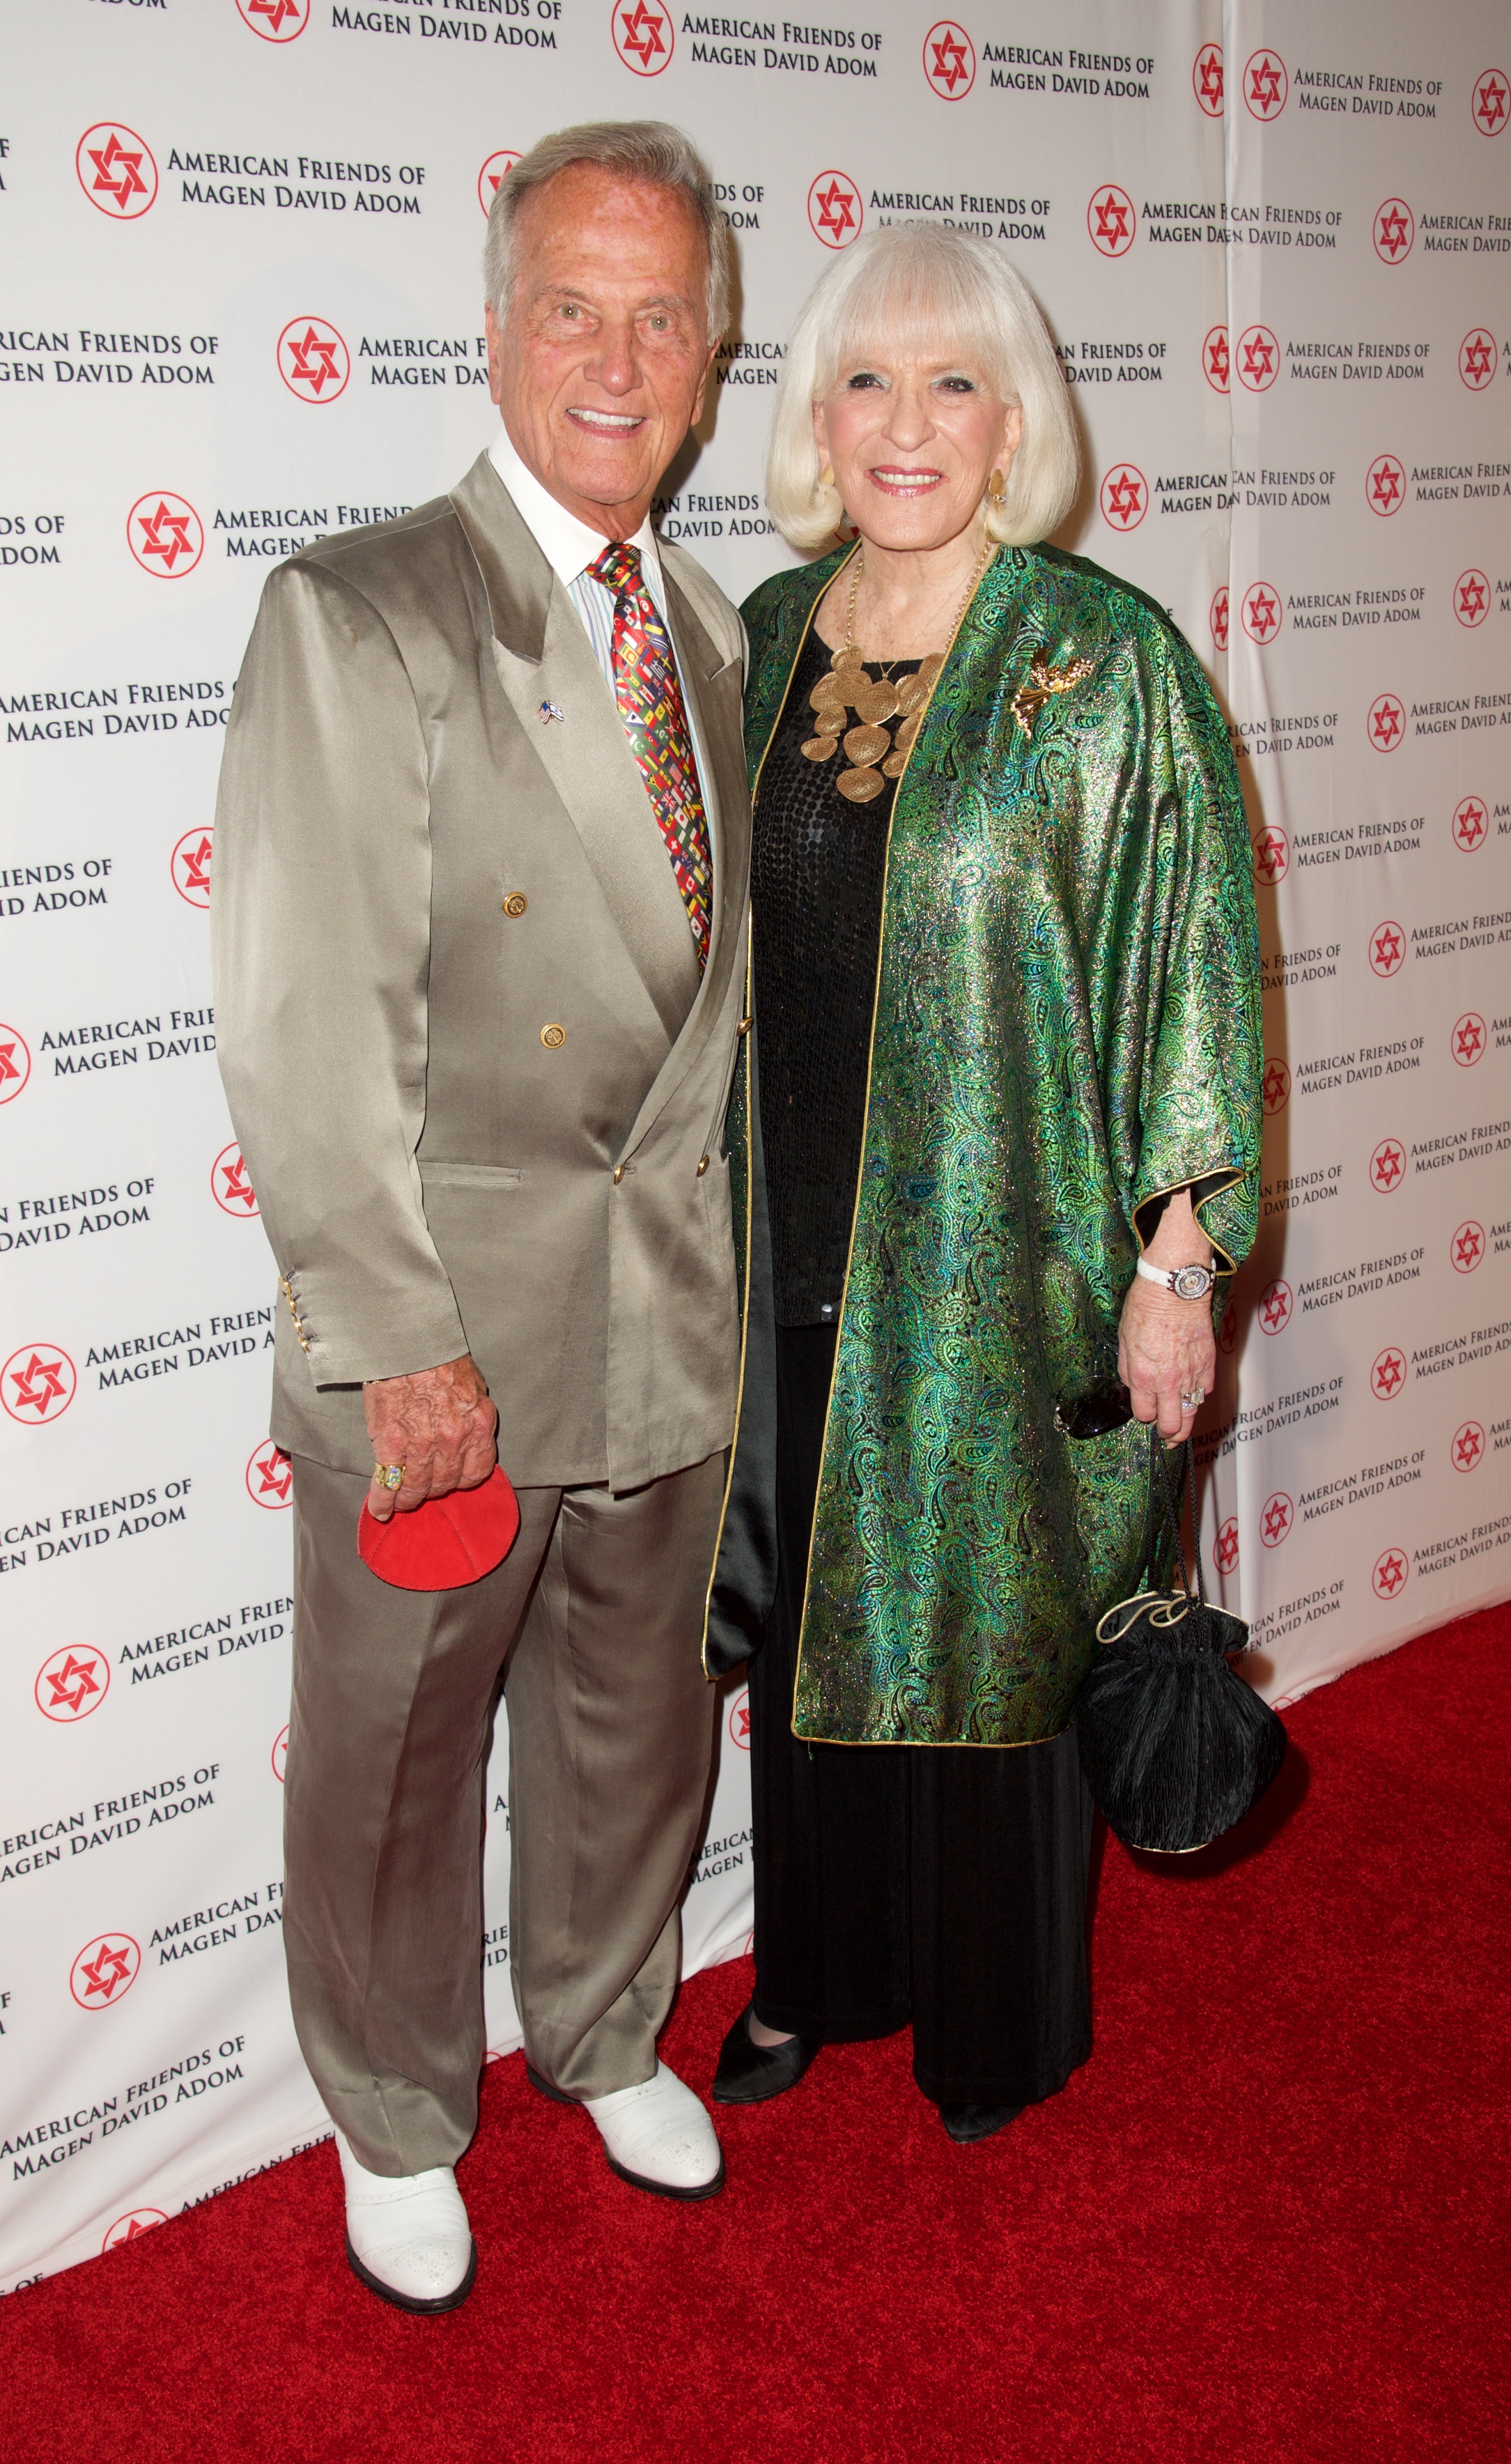 Pat and Shirley Boone at American Friends Of Magen David Adom's Red Star Ball at The Beverly Hilton Hotel on October 23, 2014 | Source: Getty Images